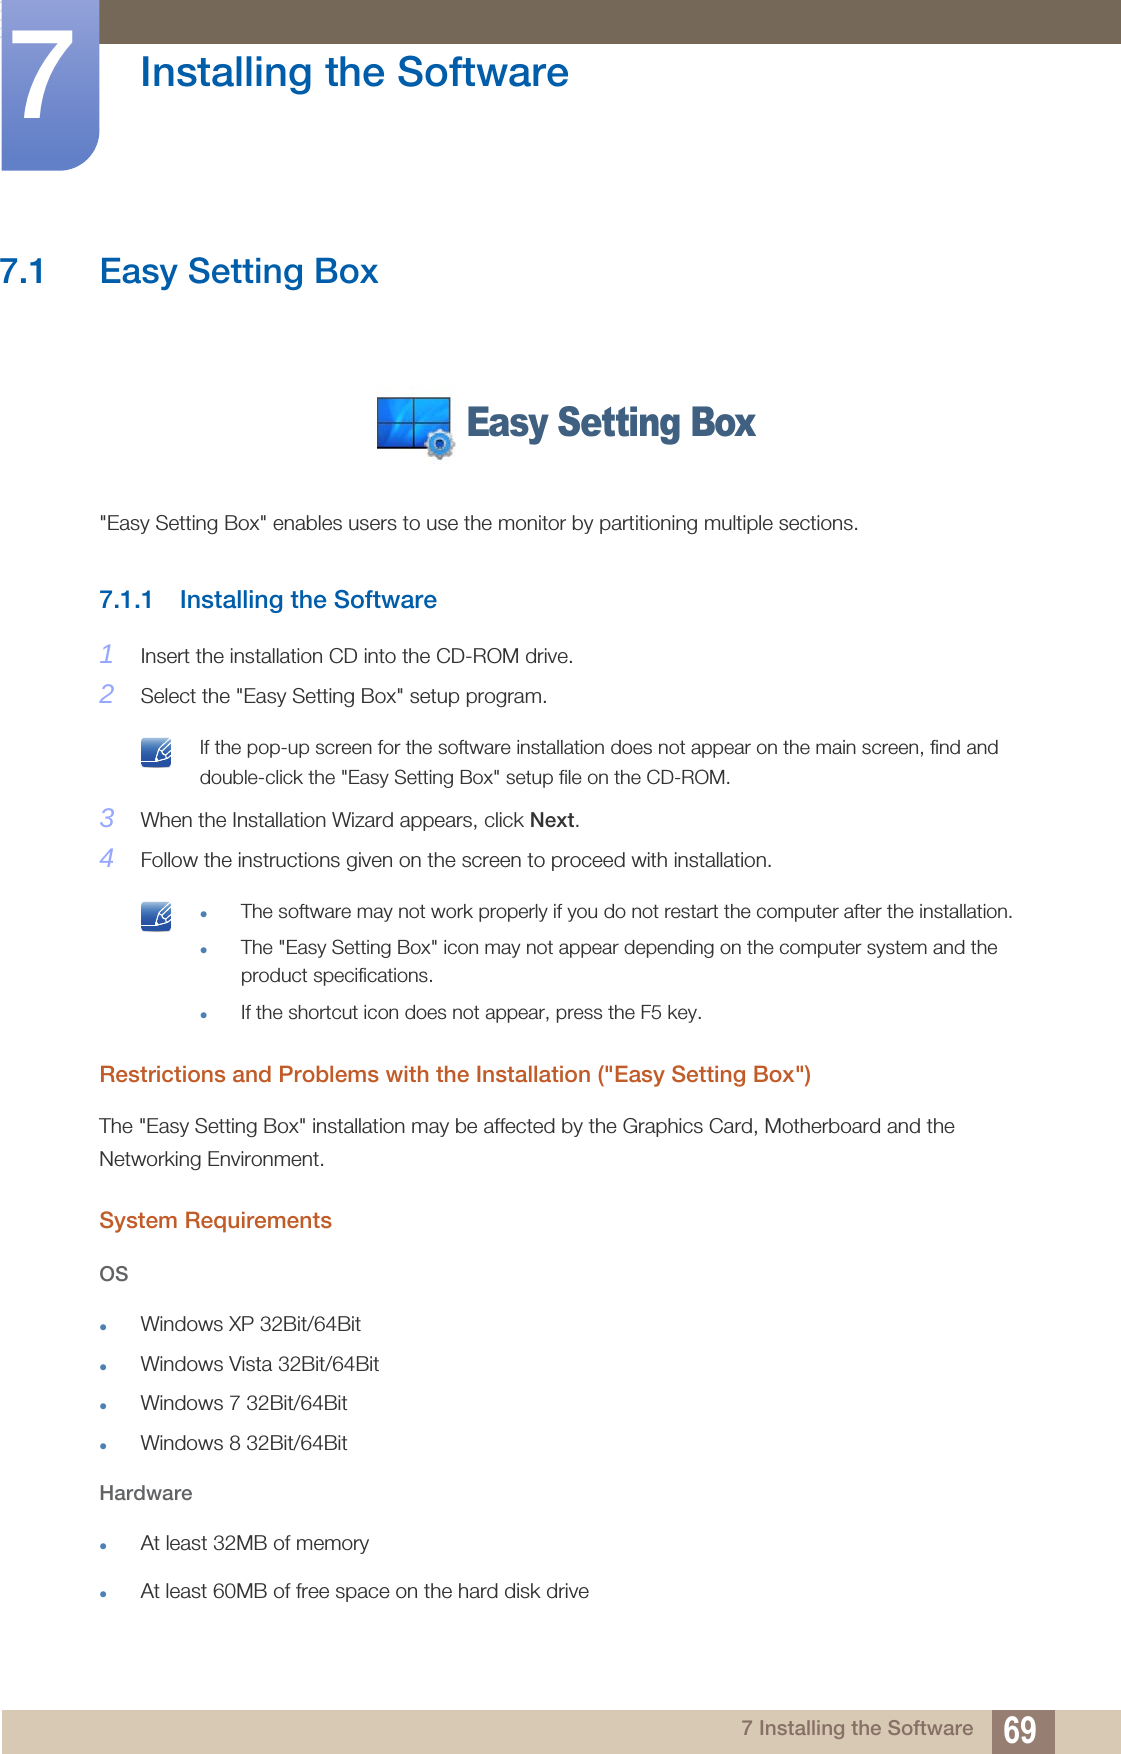 697 Installing the Software7  Installing the Software7.1 Easy Setting Box&quot;Easy Setting Box&quot; enables users to use the monitor by partitioning multiple sections.7.1.1 Installing the Software1Insert the installation CD into the CD-ROM drive.2Select the &quot;Easy Setting Box&quot; setup program. If the pop-up screen for the software installation does not appear on the main screen, find and double-click the &quot;Easy Setting Box&quot; setup file on the CD-ROM. 3When the Installation Wizard appears, click Next.4Follow the instructions given on the screen to proceed with installation. The software may not work properly if you do not restart the computer after the installation.The &quot;Easy Setting Box&quot; icon may not appear depending on the computer system and the product specifications.If the shortcut icon does not appear, press the F5 key. Restrictions and Problems with the Installation (&quot;Easy Setting Box&quot;)The &quot;Easy Setting Box&quot; installation may be affected by the Graphics Card, Motherboard and the Networking Environment.System RequirementsOSWindows XP 32Bit/64BitWindows Vista 32Bit/64BitWindows 7 32Bit/64BitWindows 8 32Bit/64BitHardwareAt least 32MB of memoryAt least 60MB of free space on the hard disk driveEasy Setting Box